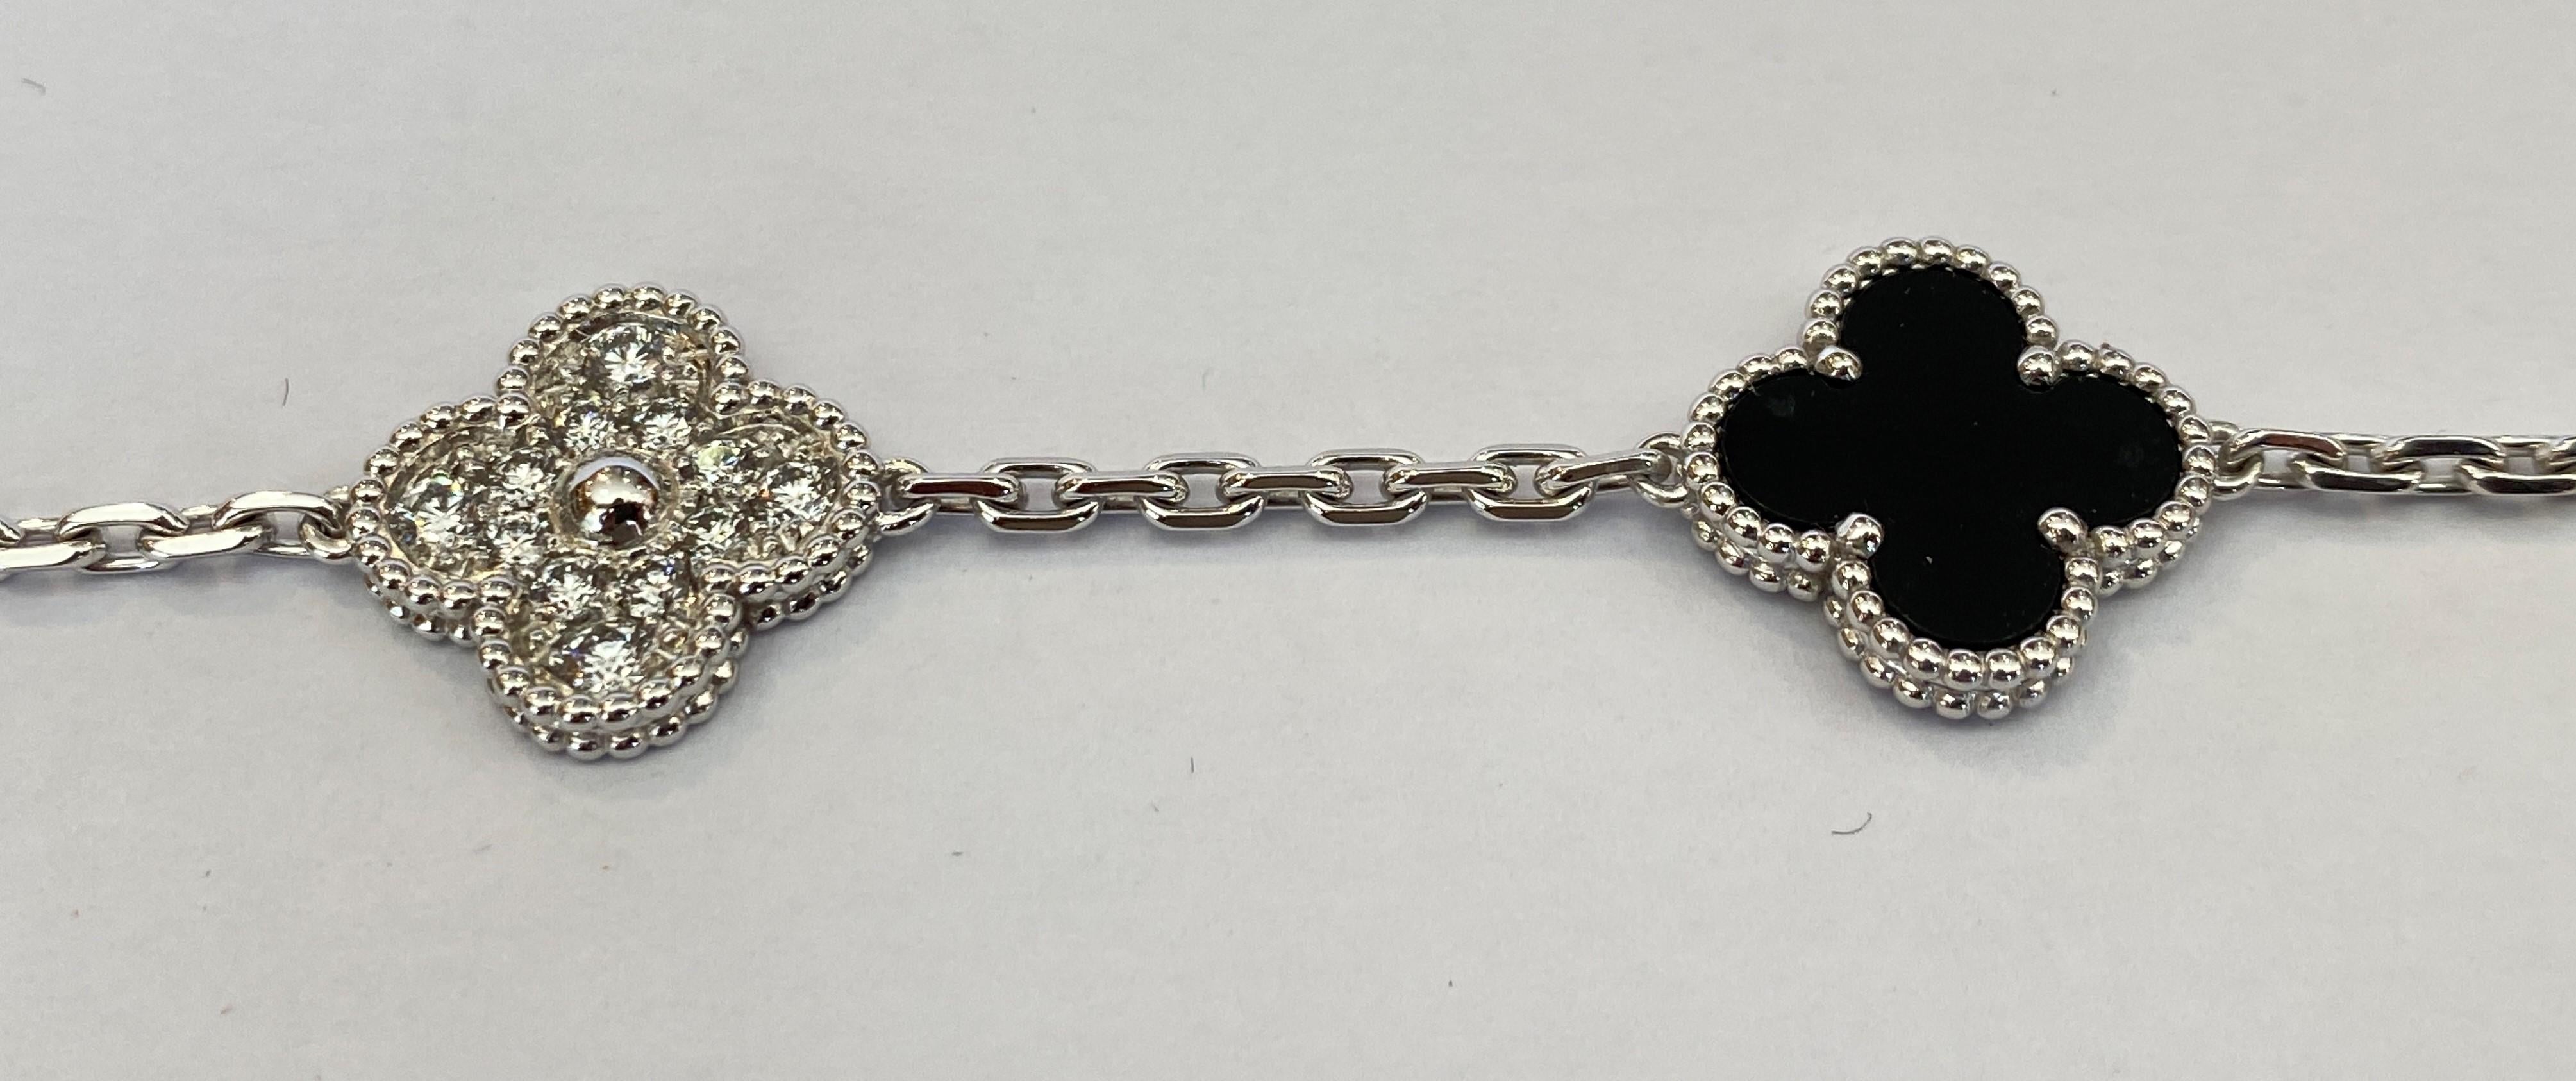 Brilliant Cut Van Cleef & Arpels Alhambra Bracelet in Diamonds and Onyx in 18k White Gold For Sale